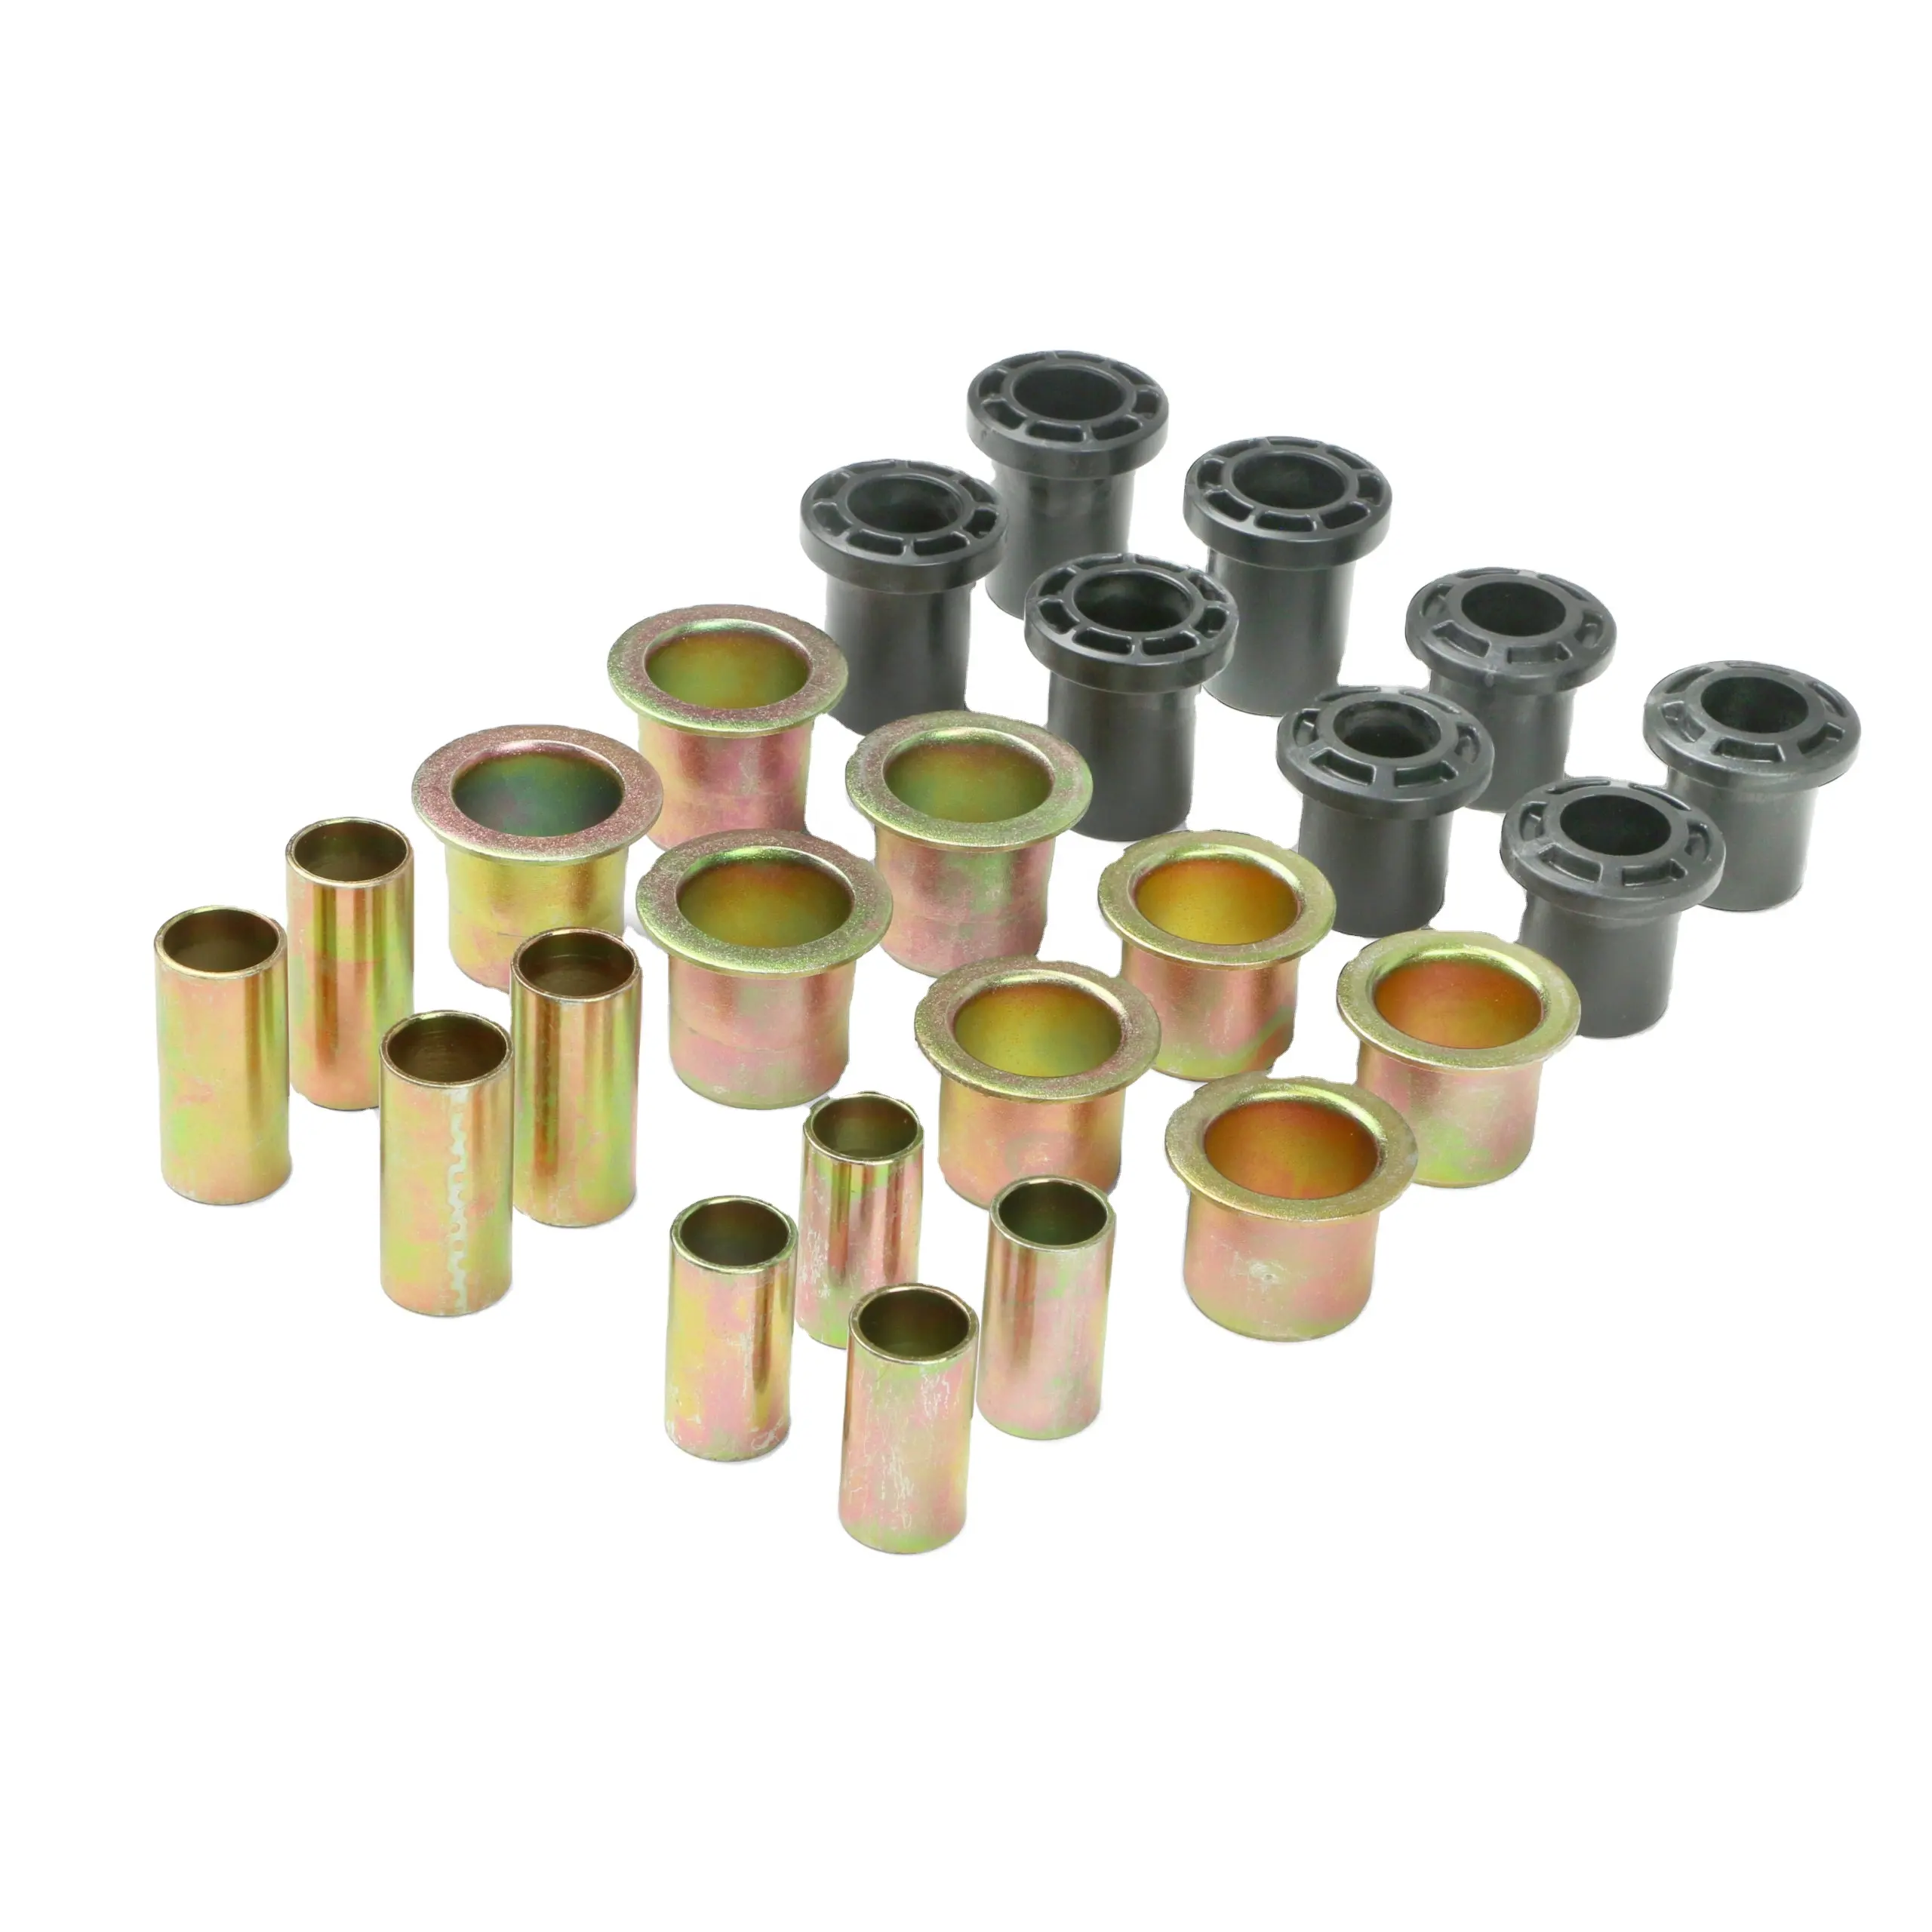 OEM Custom Made Stainless Steel Parts Drill Flange Bronze Bearing Bushes Copper CNC Turning Parts Brass Collar Bushings